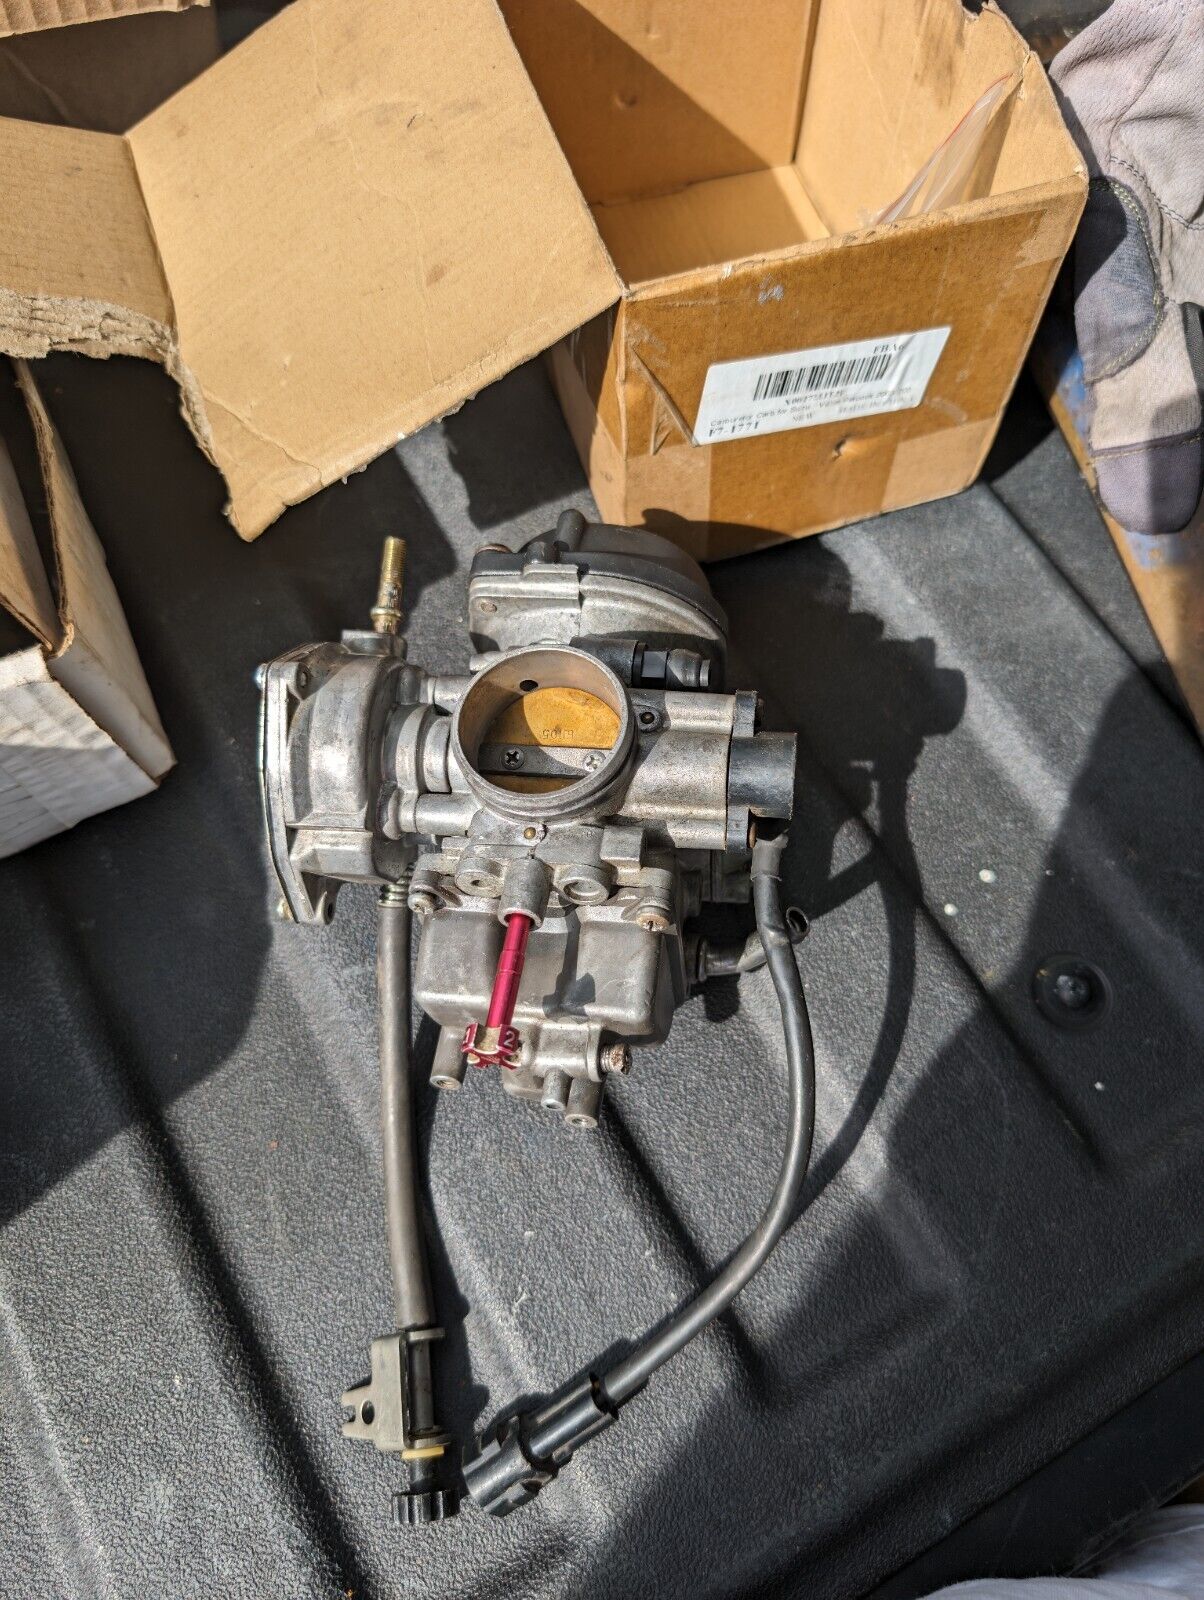 Ltz 400 carburetor in great condition recently rebuilt works like new 